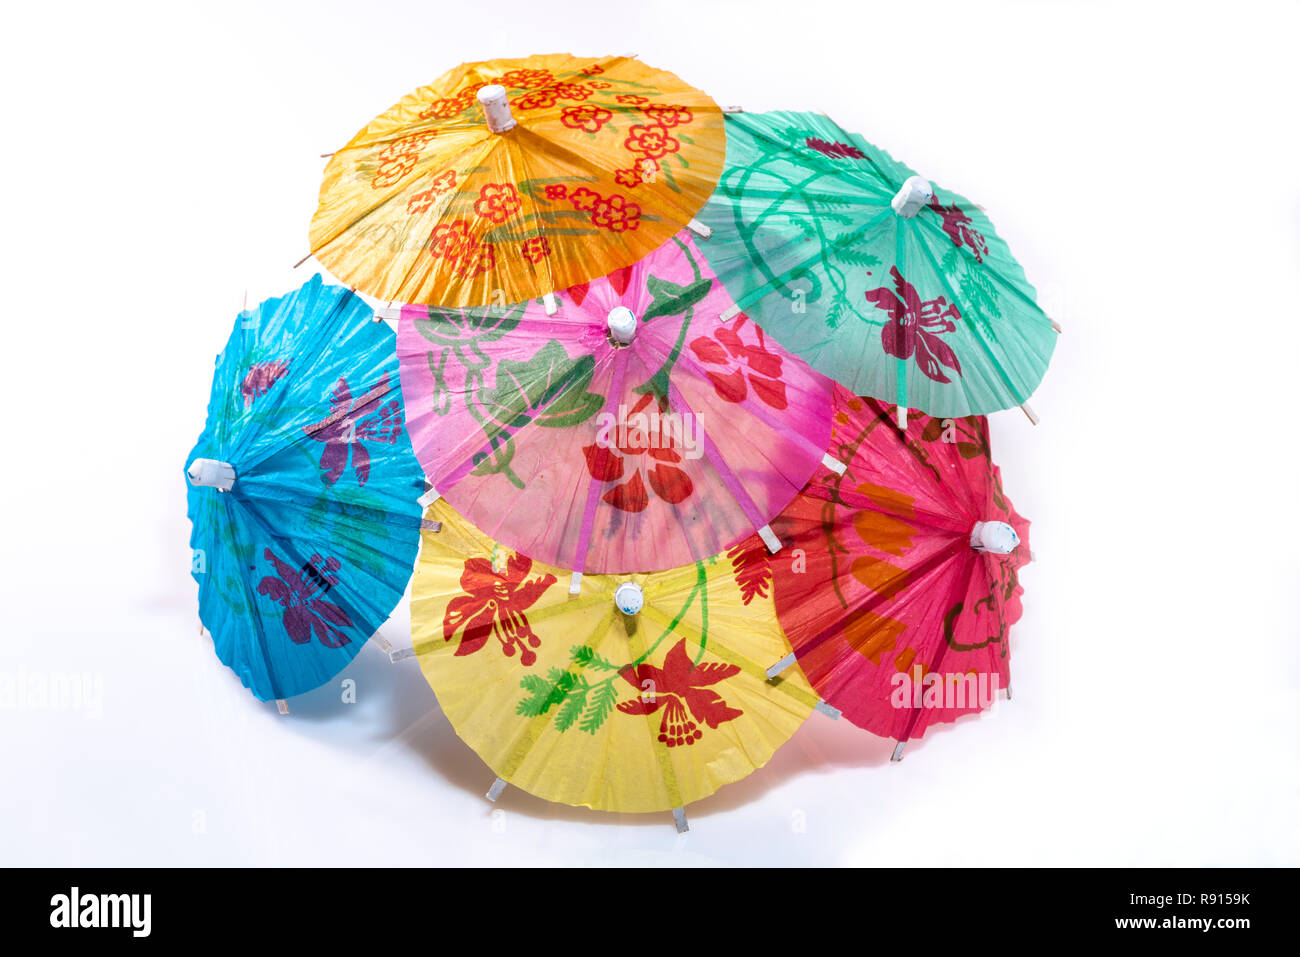 Group of paper cocktail umbrellas on a white background. Stock Photo